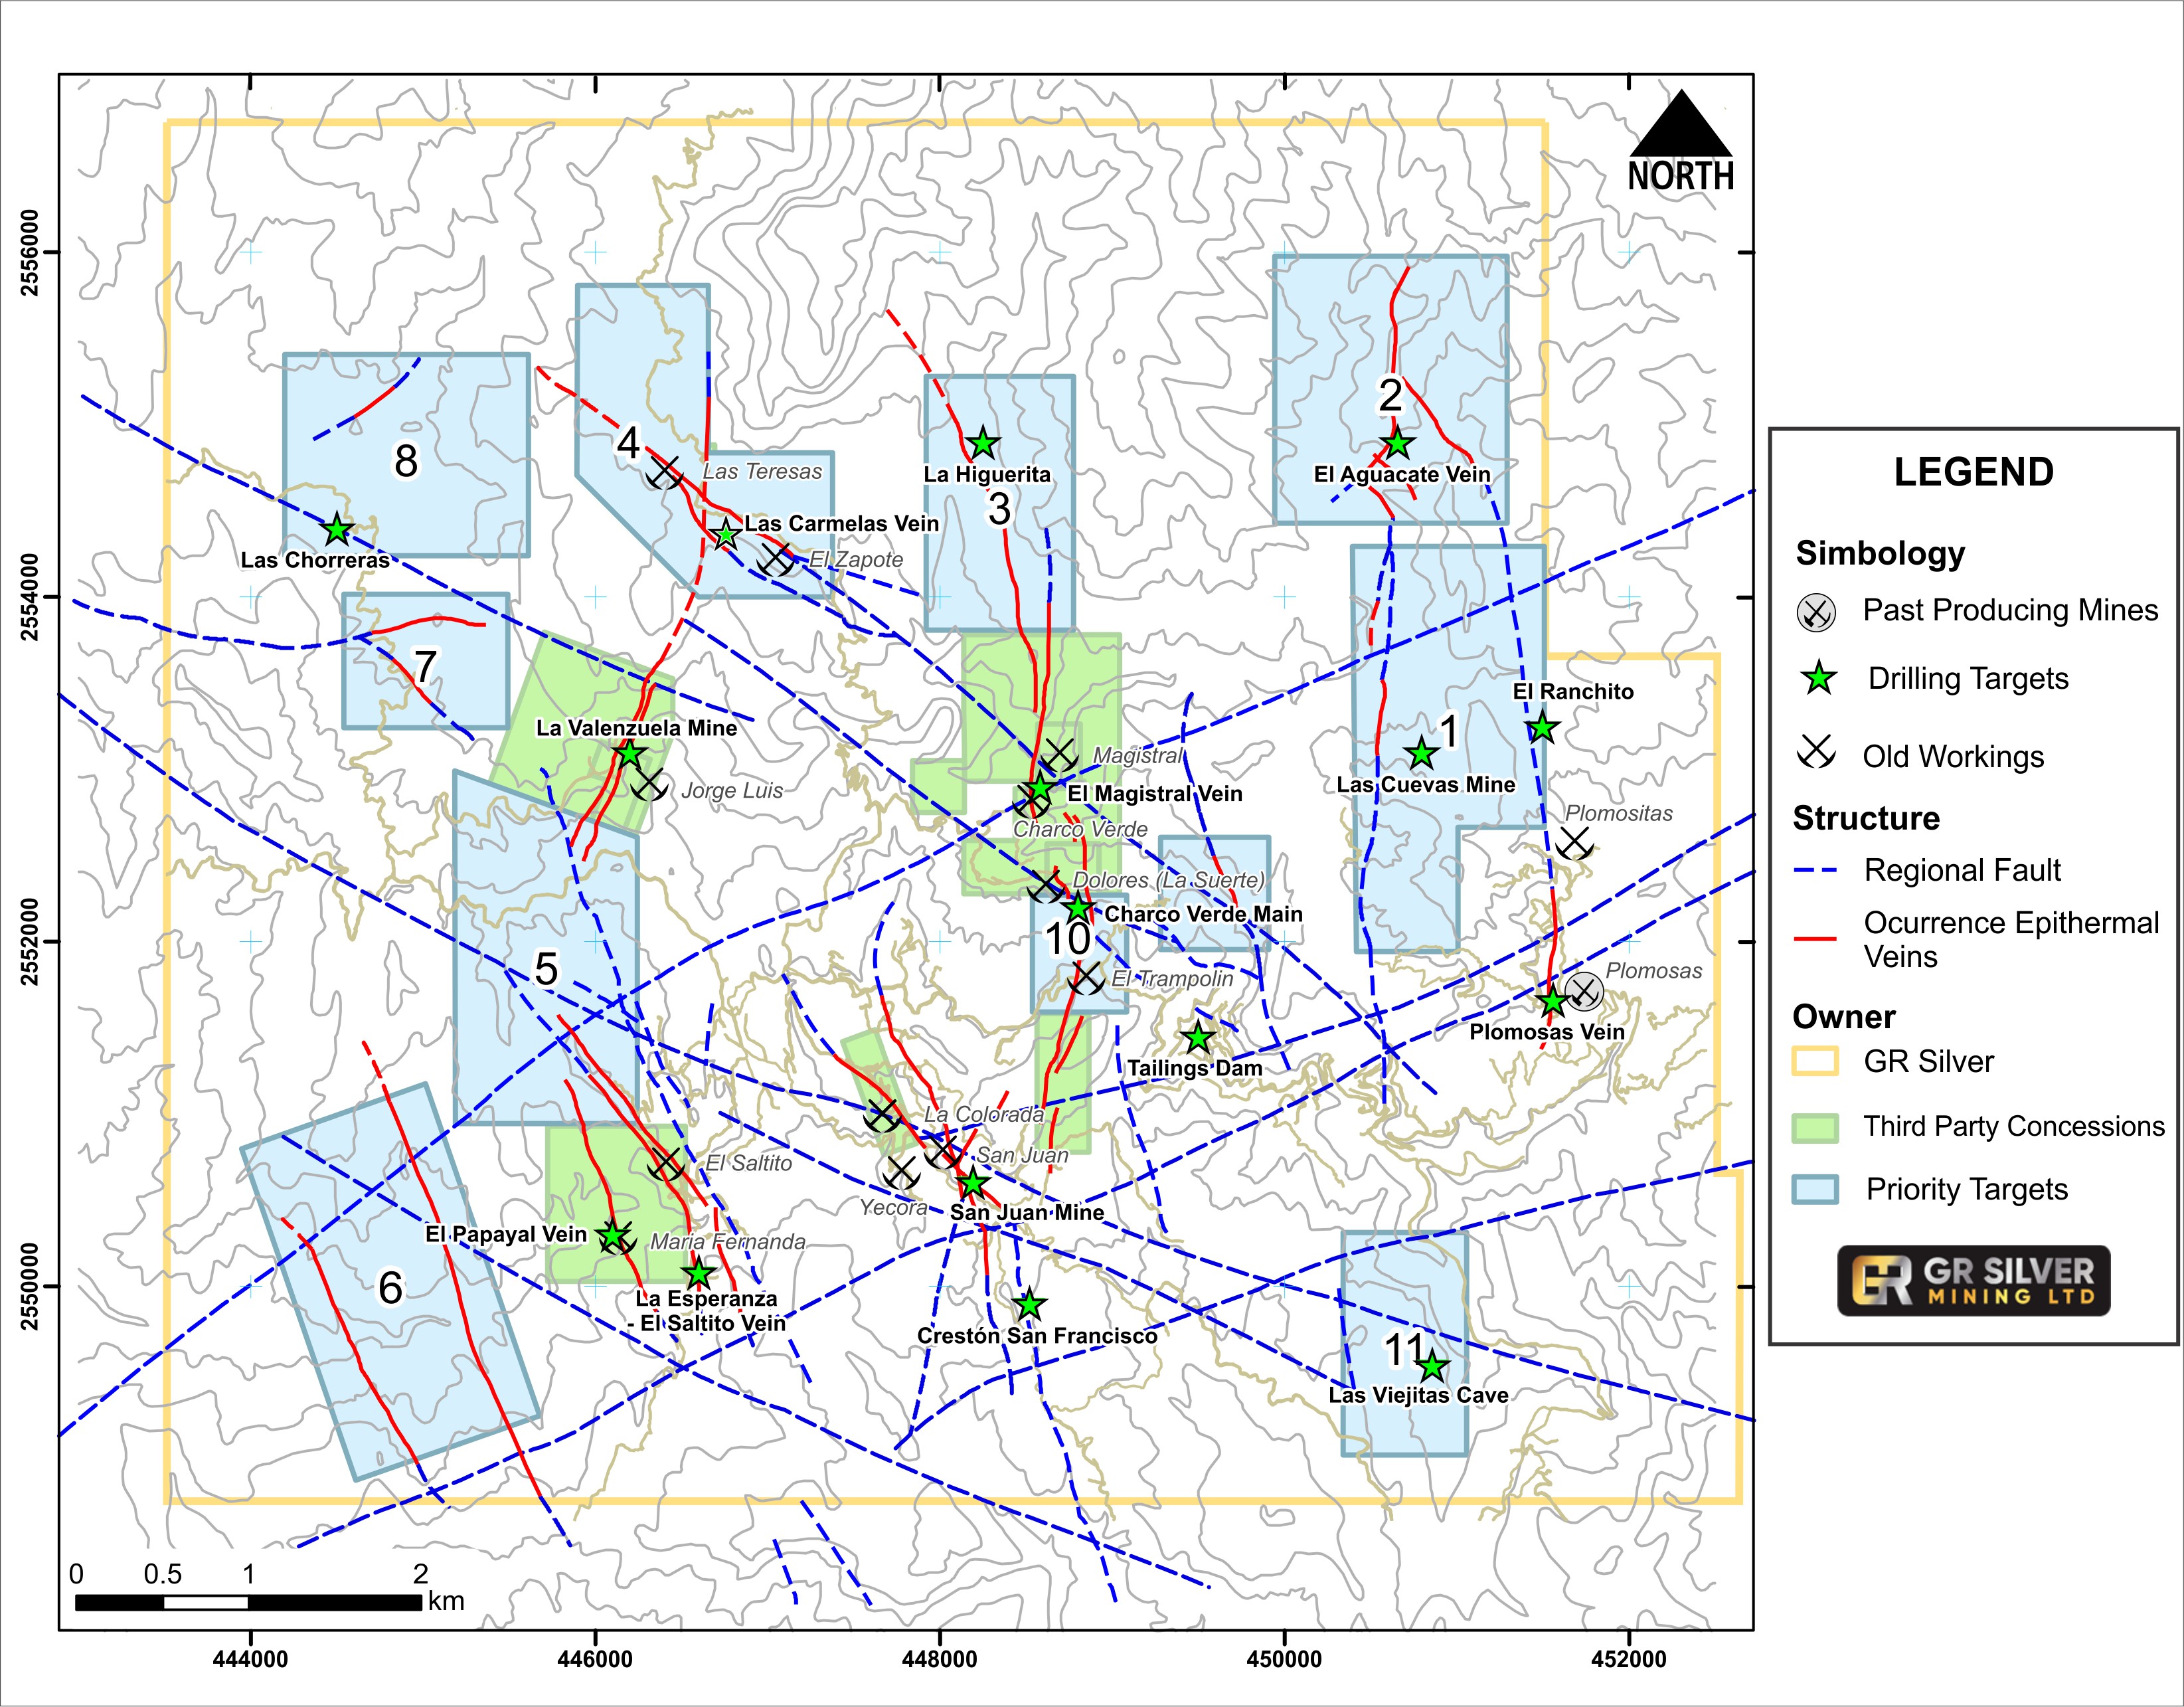 Future Exploration Drilling Targets – Under-explored Epithermal Vein Systems